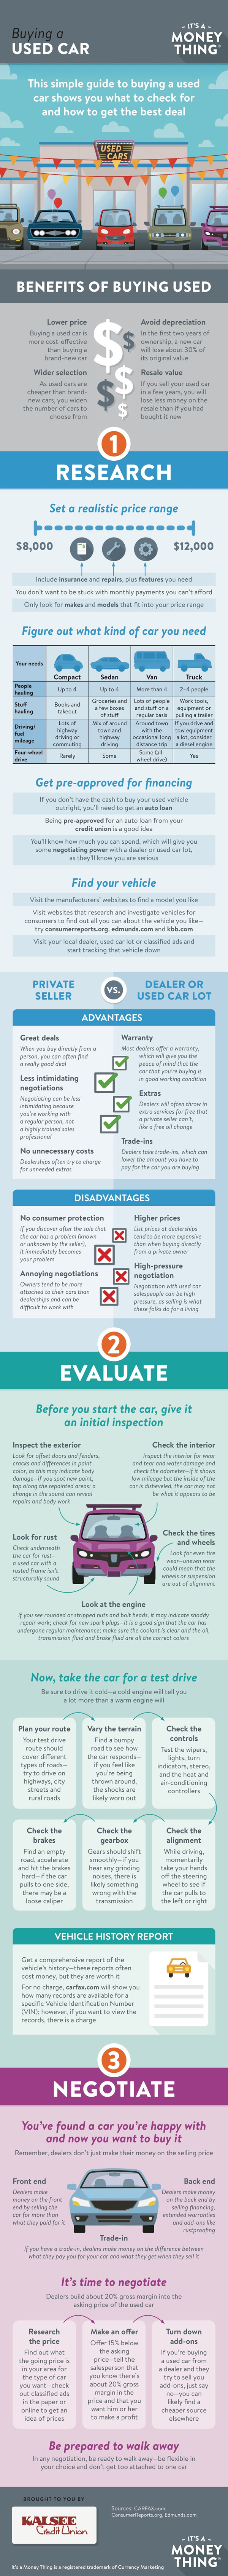 buying a used car infographic, click for transcription